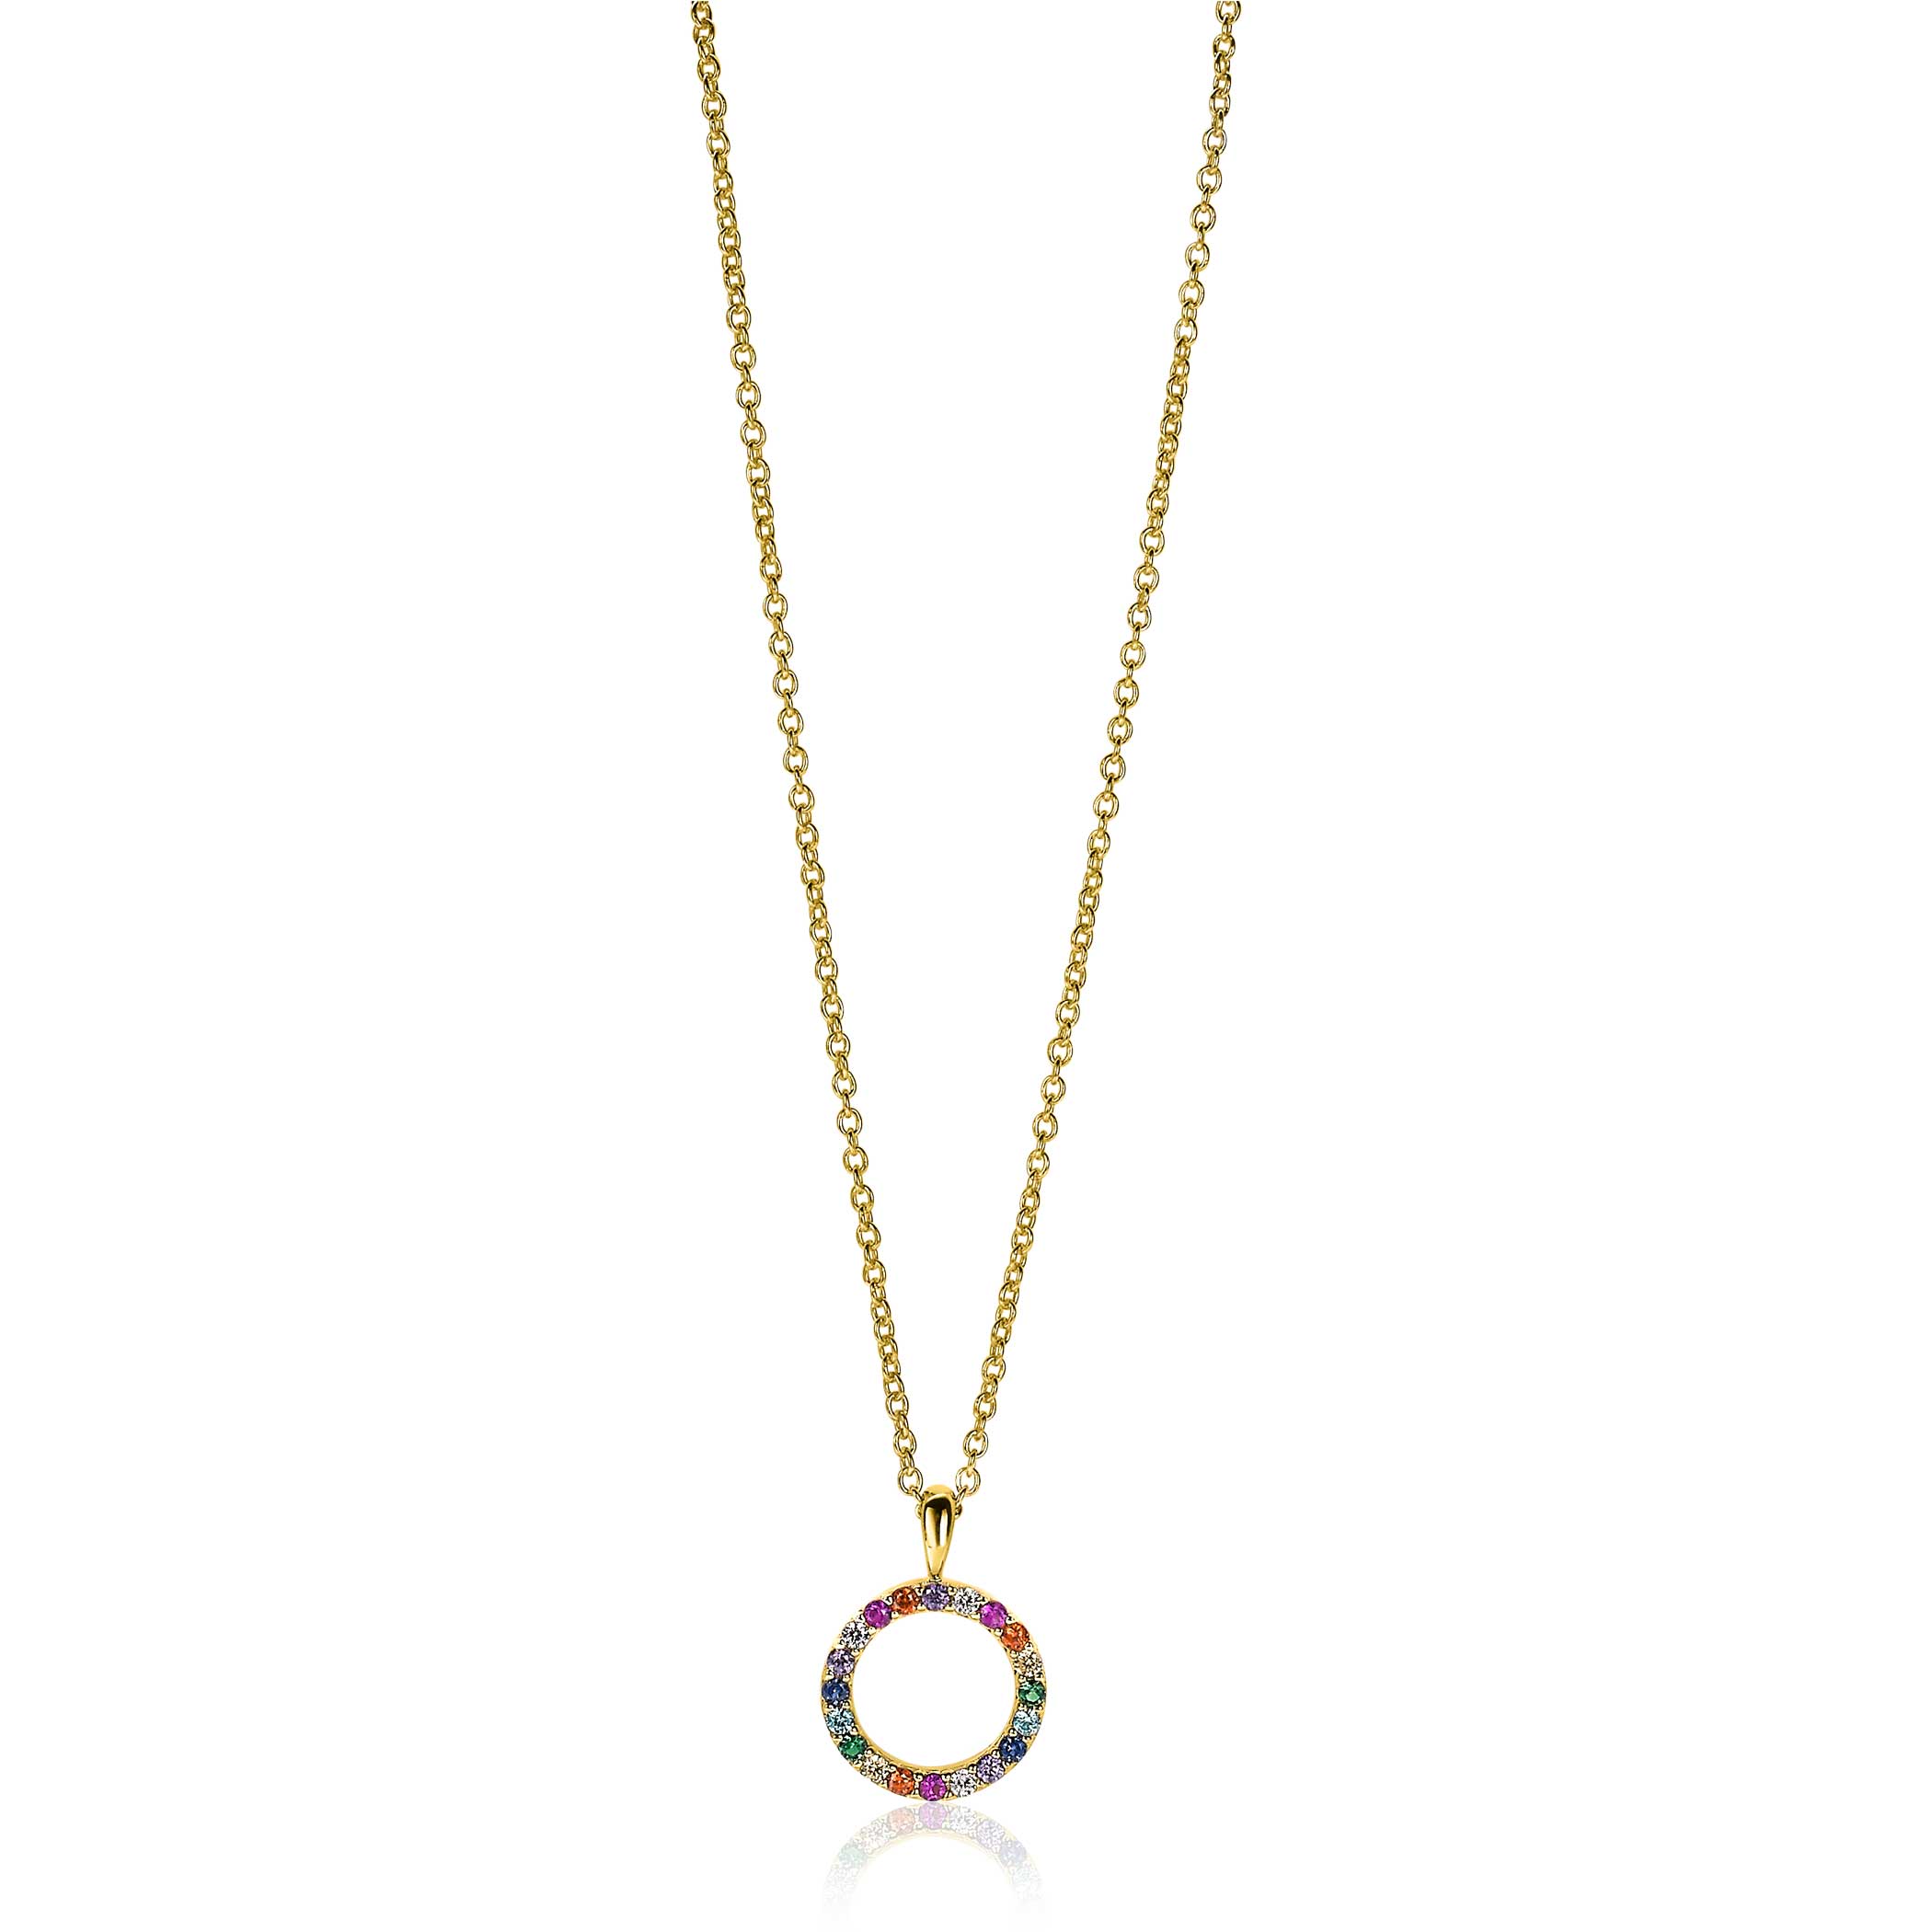 12mm ZINZI Gold Plated Sterling Silver Pendant Rainbow Color Stones ZIH2170 (excl. necklace)